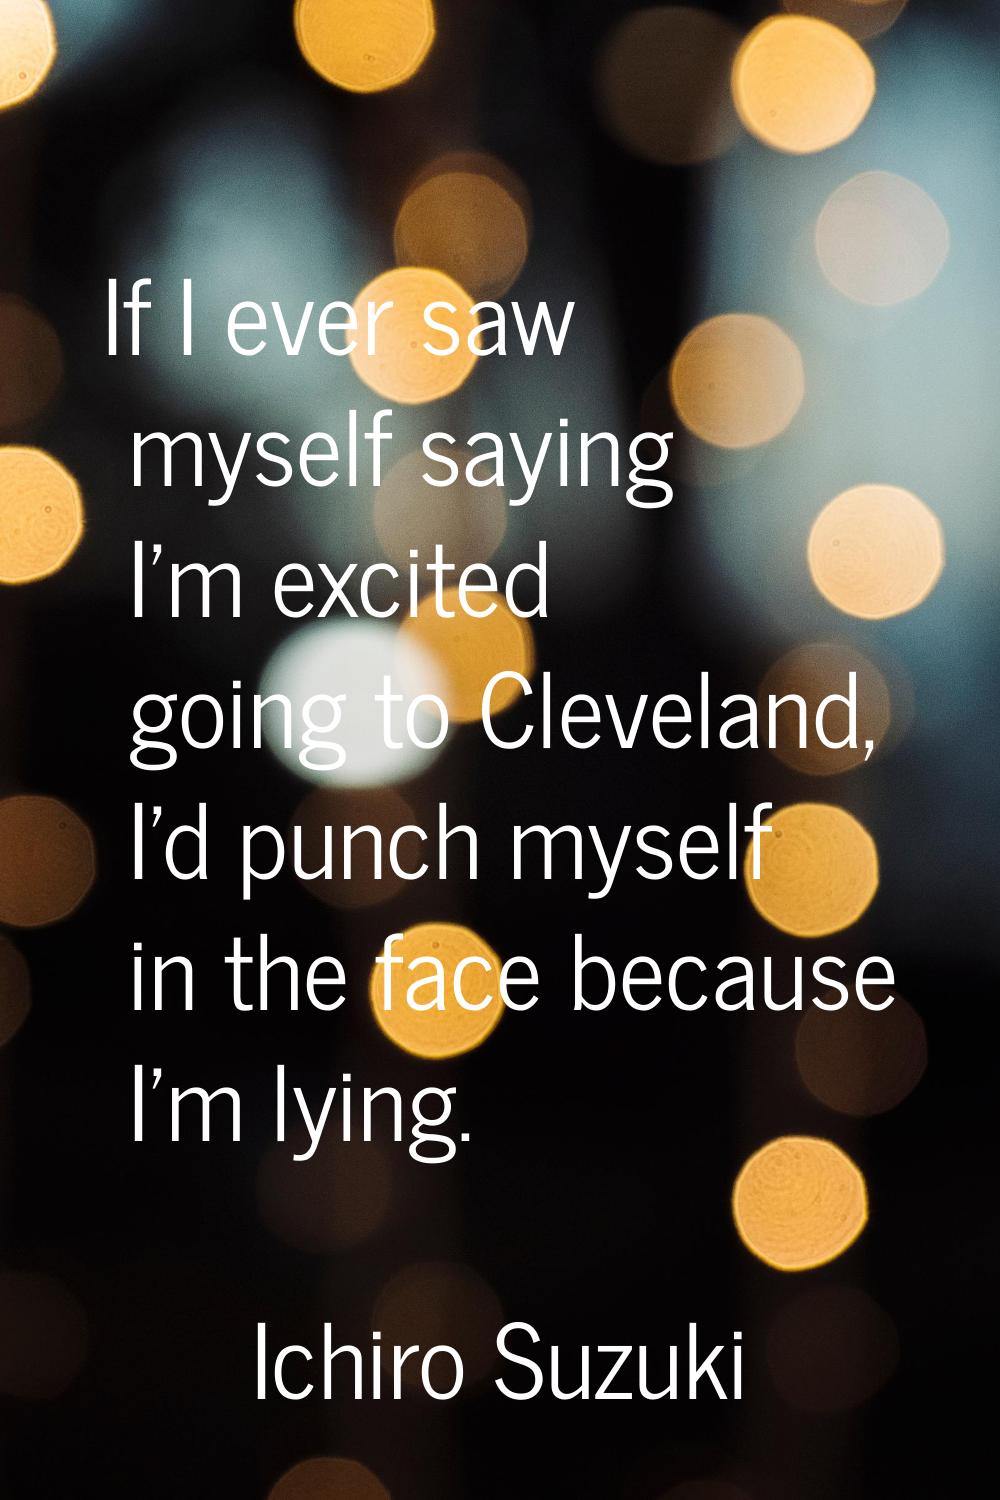 If I ever saw myself saying I'm excited going to Cleveland, I'd punch myself in the face because I'